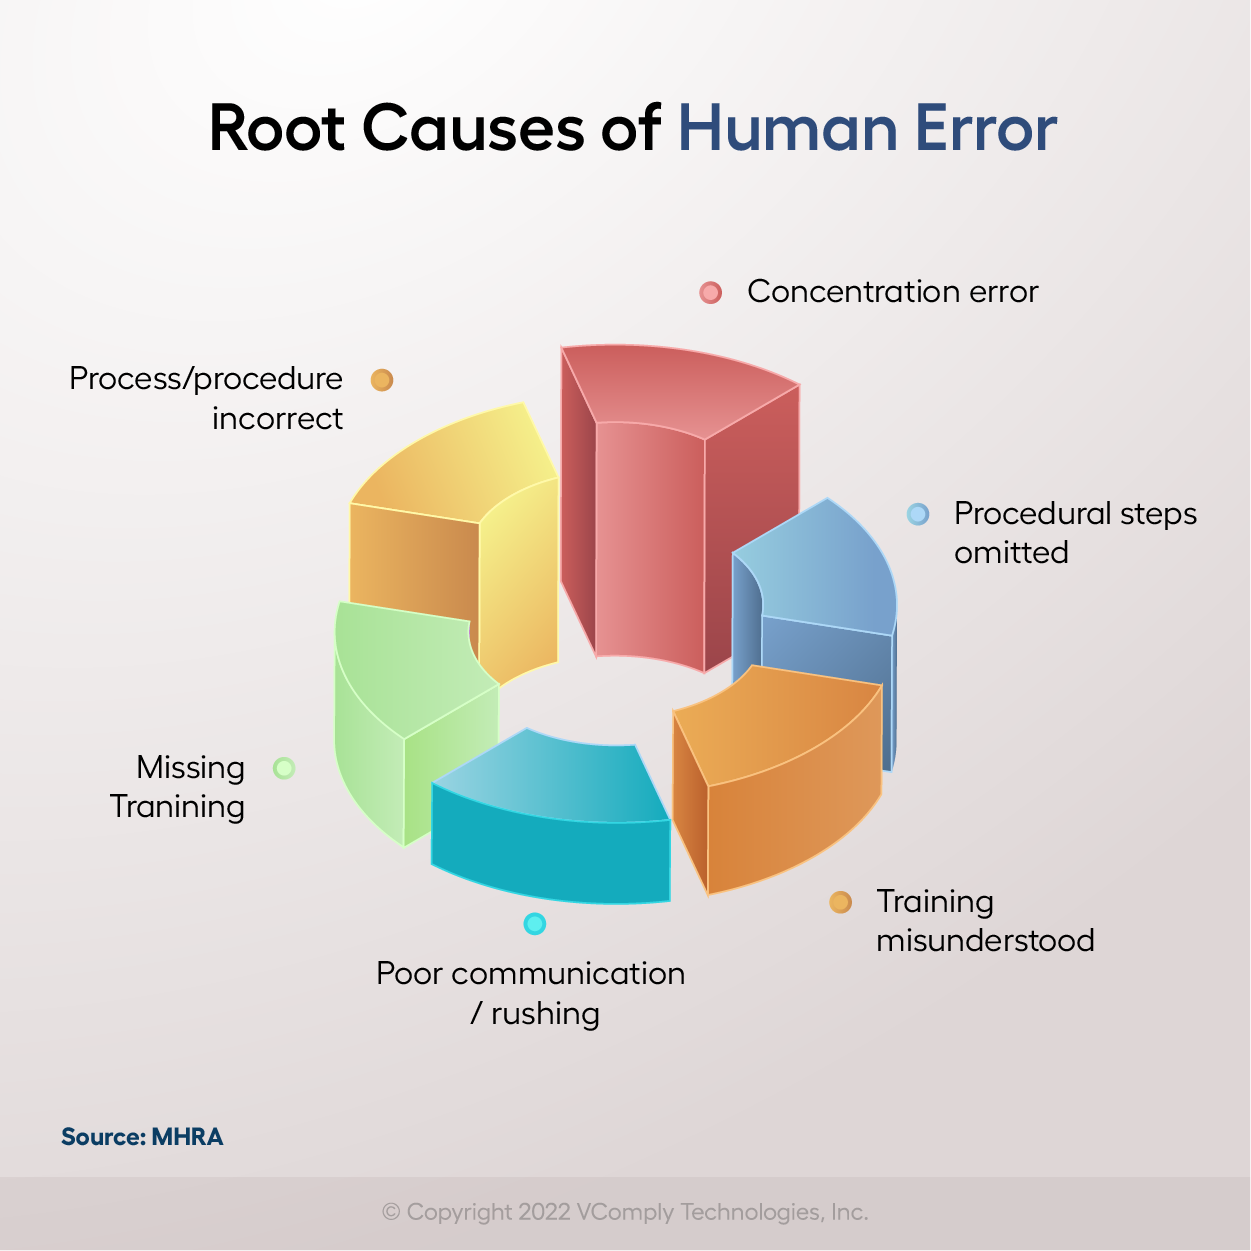 Root causes of human error